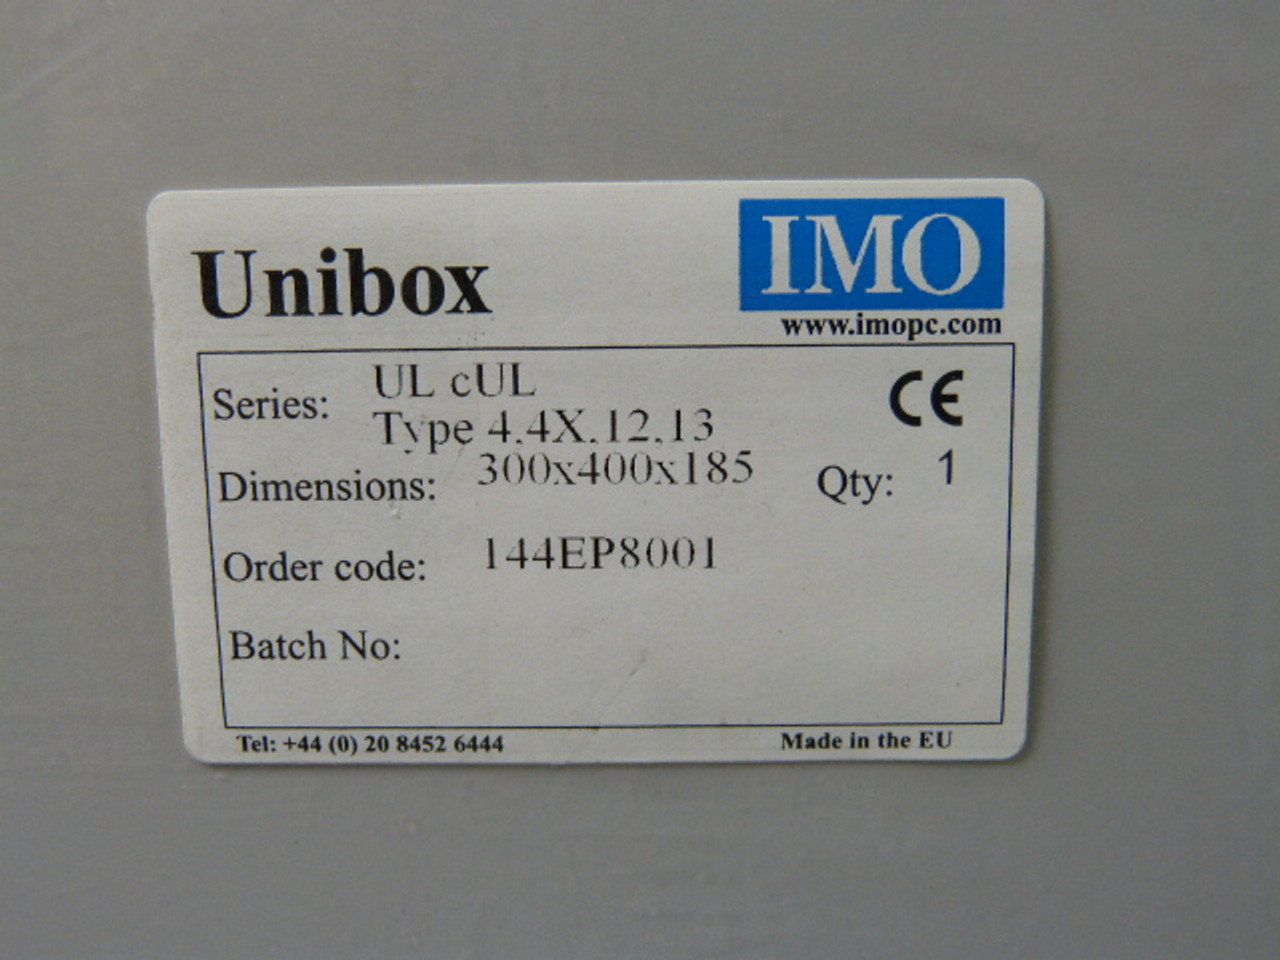 unibox email review